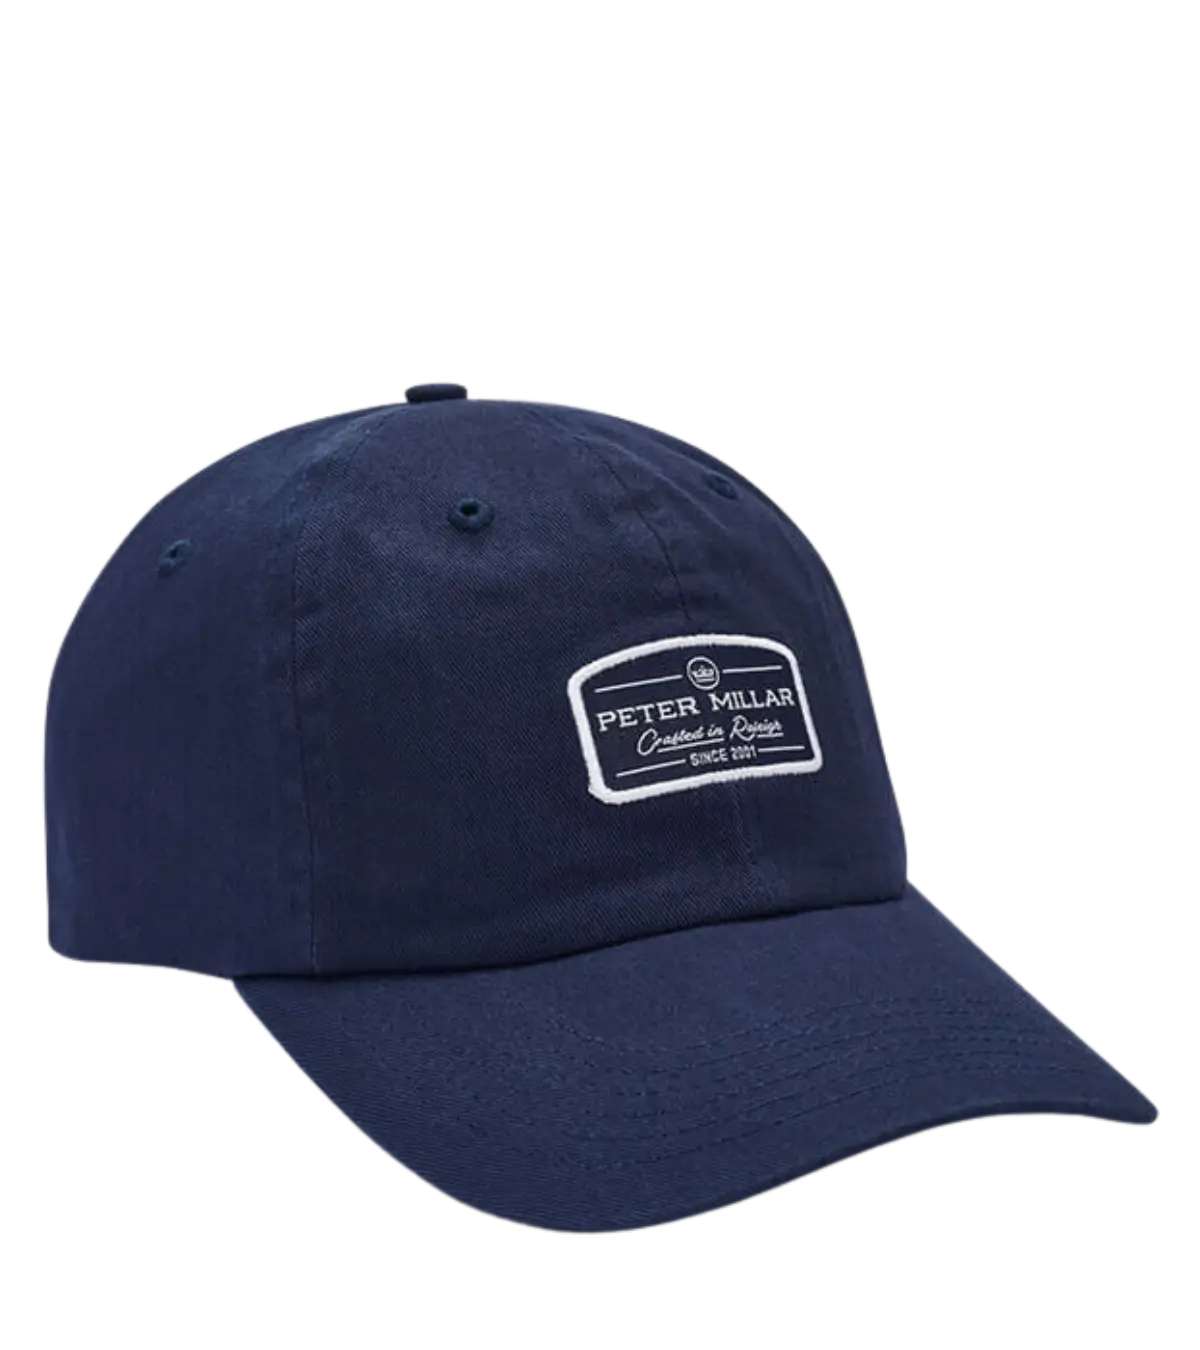 Peter Millar, Men's Raleigh Crafted Hat